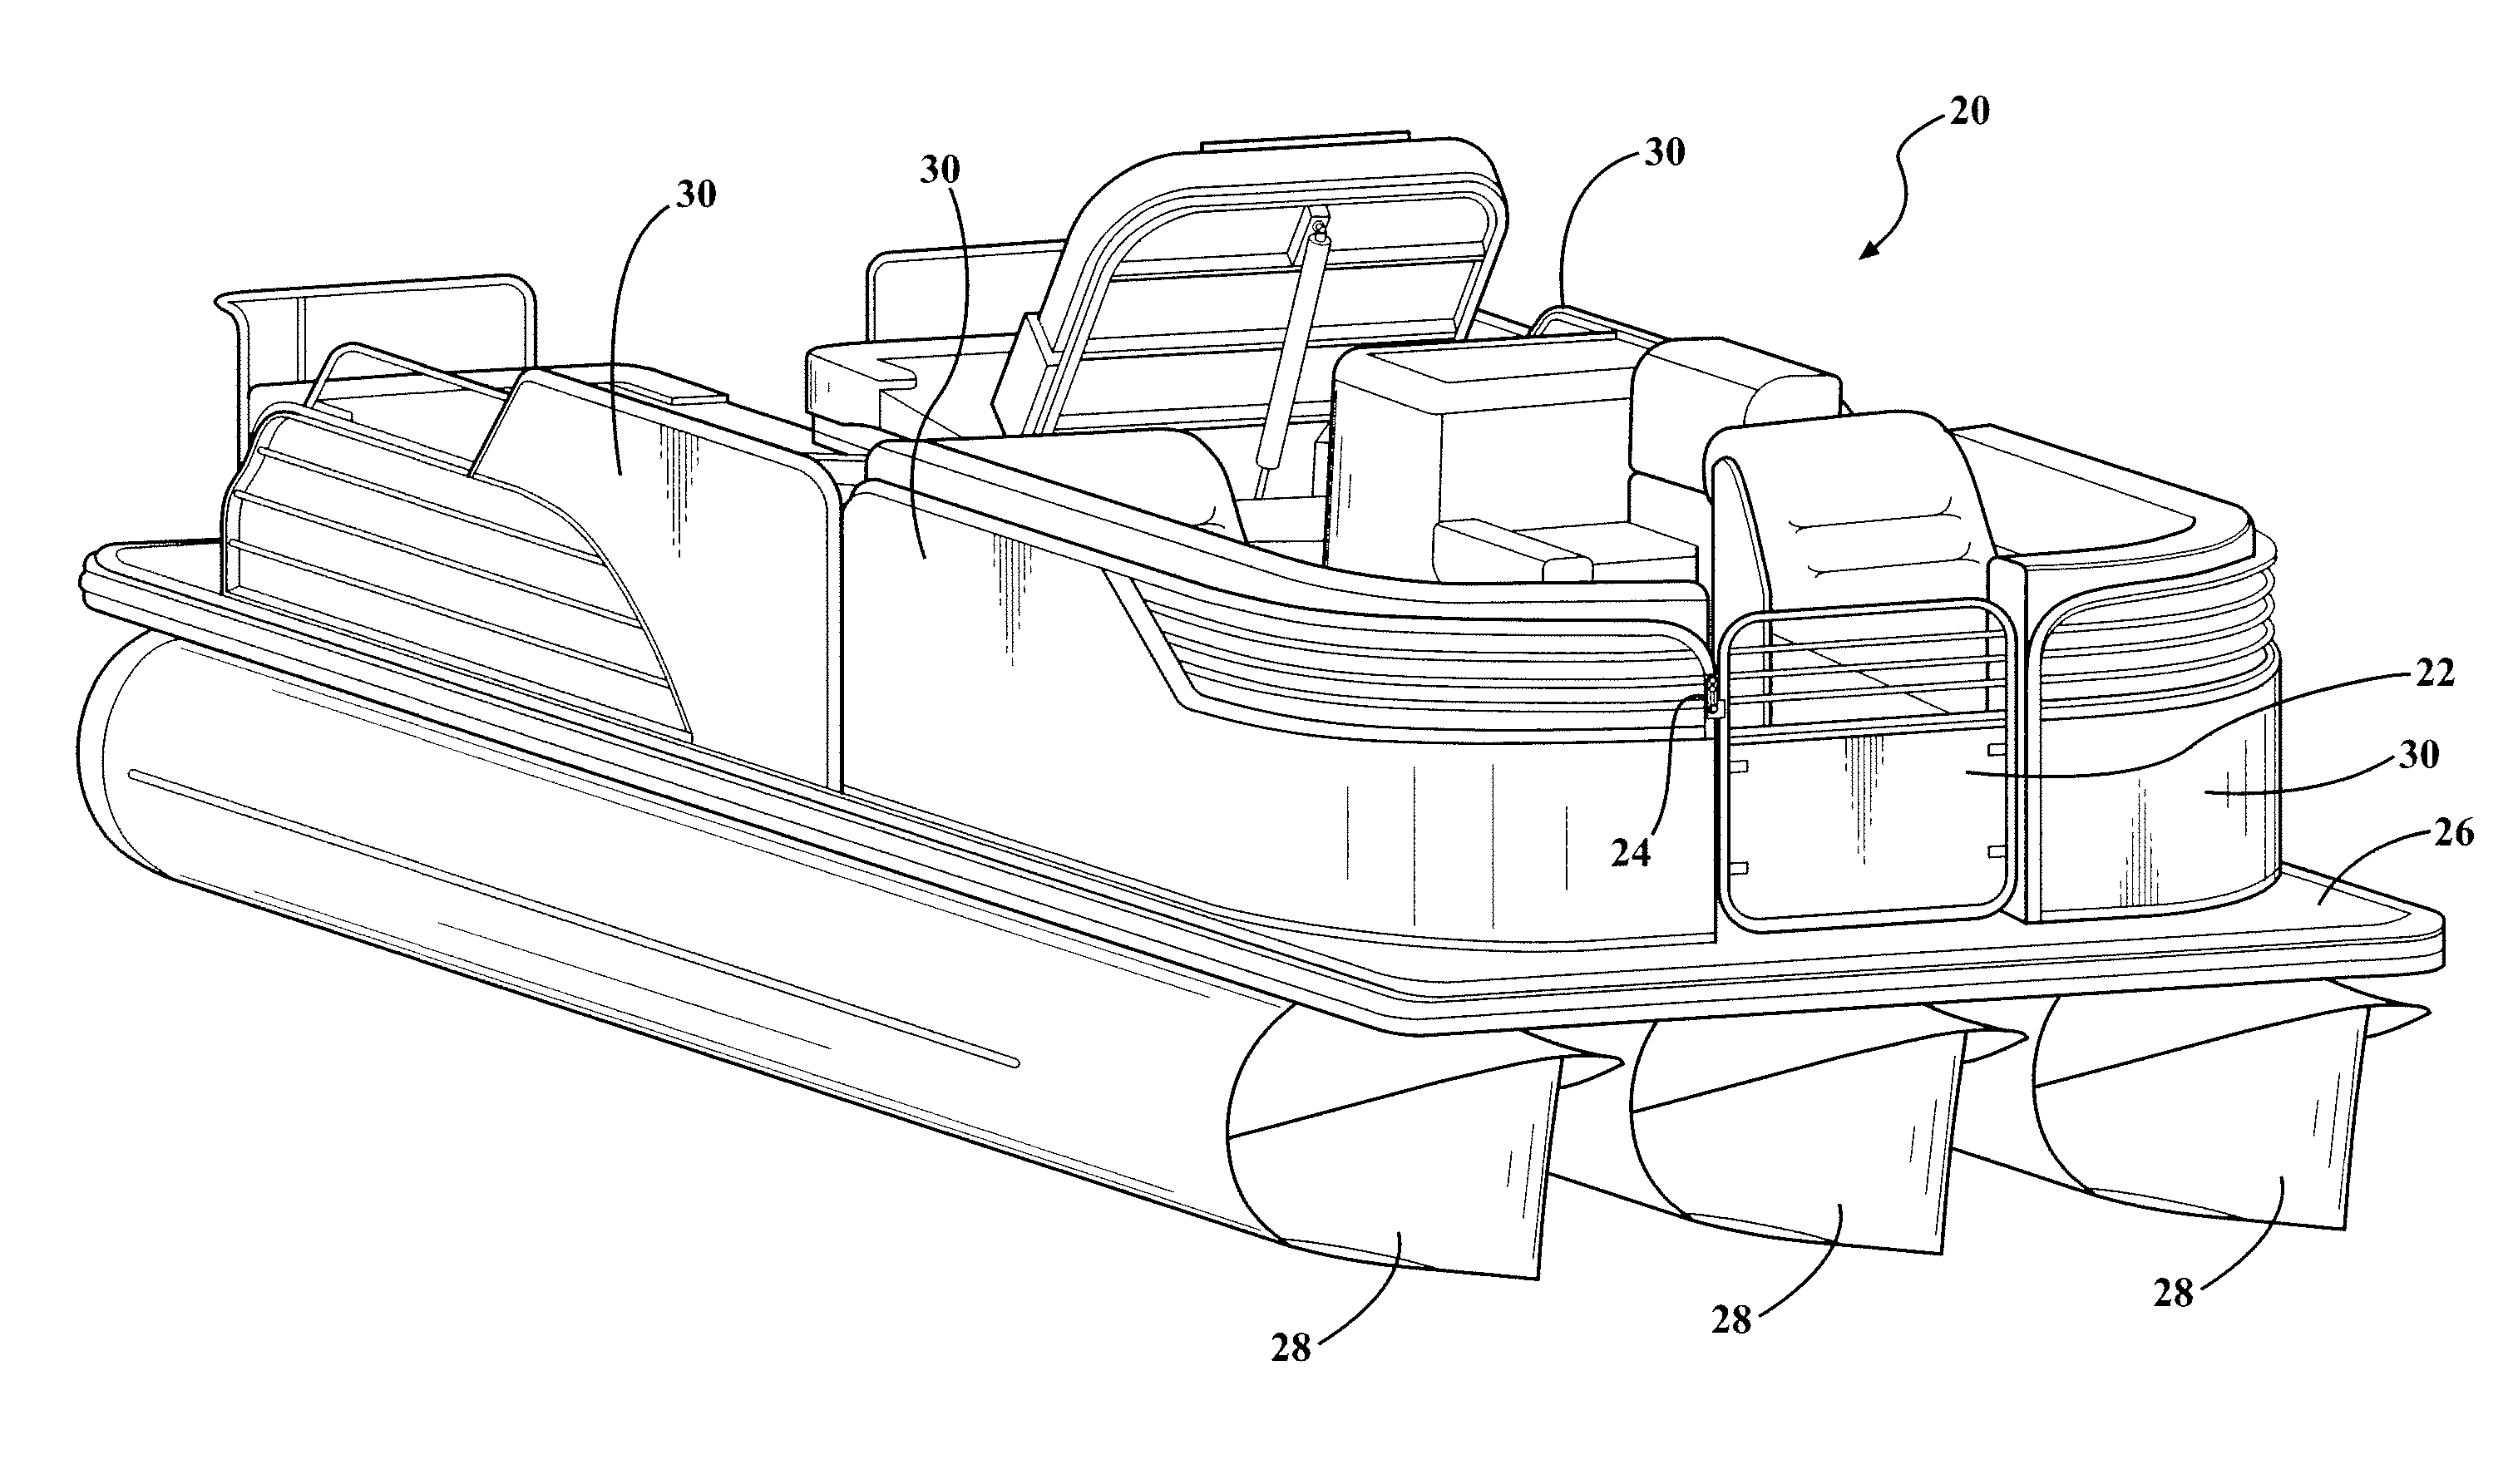 Boat with a latch assembly